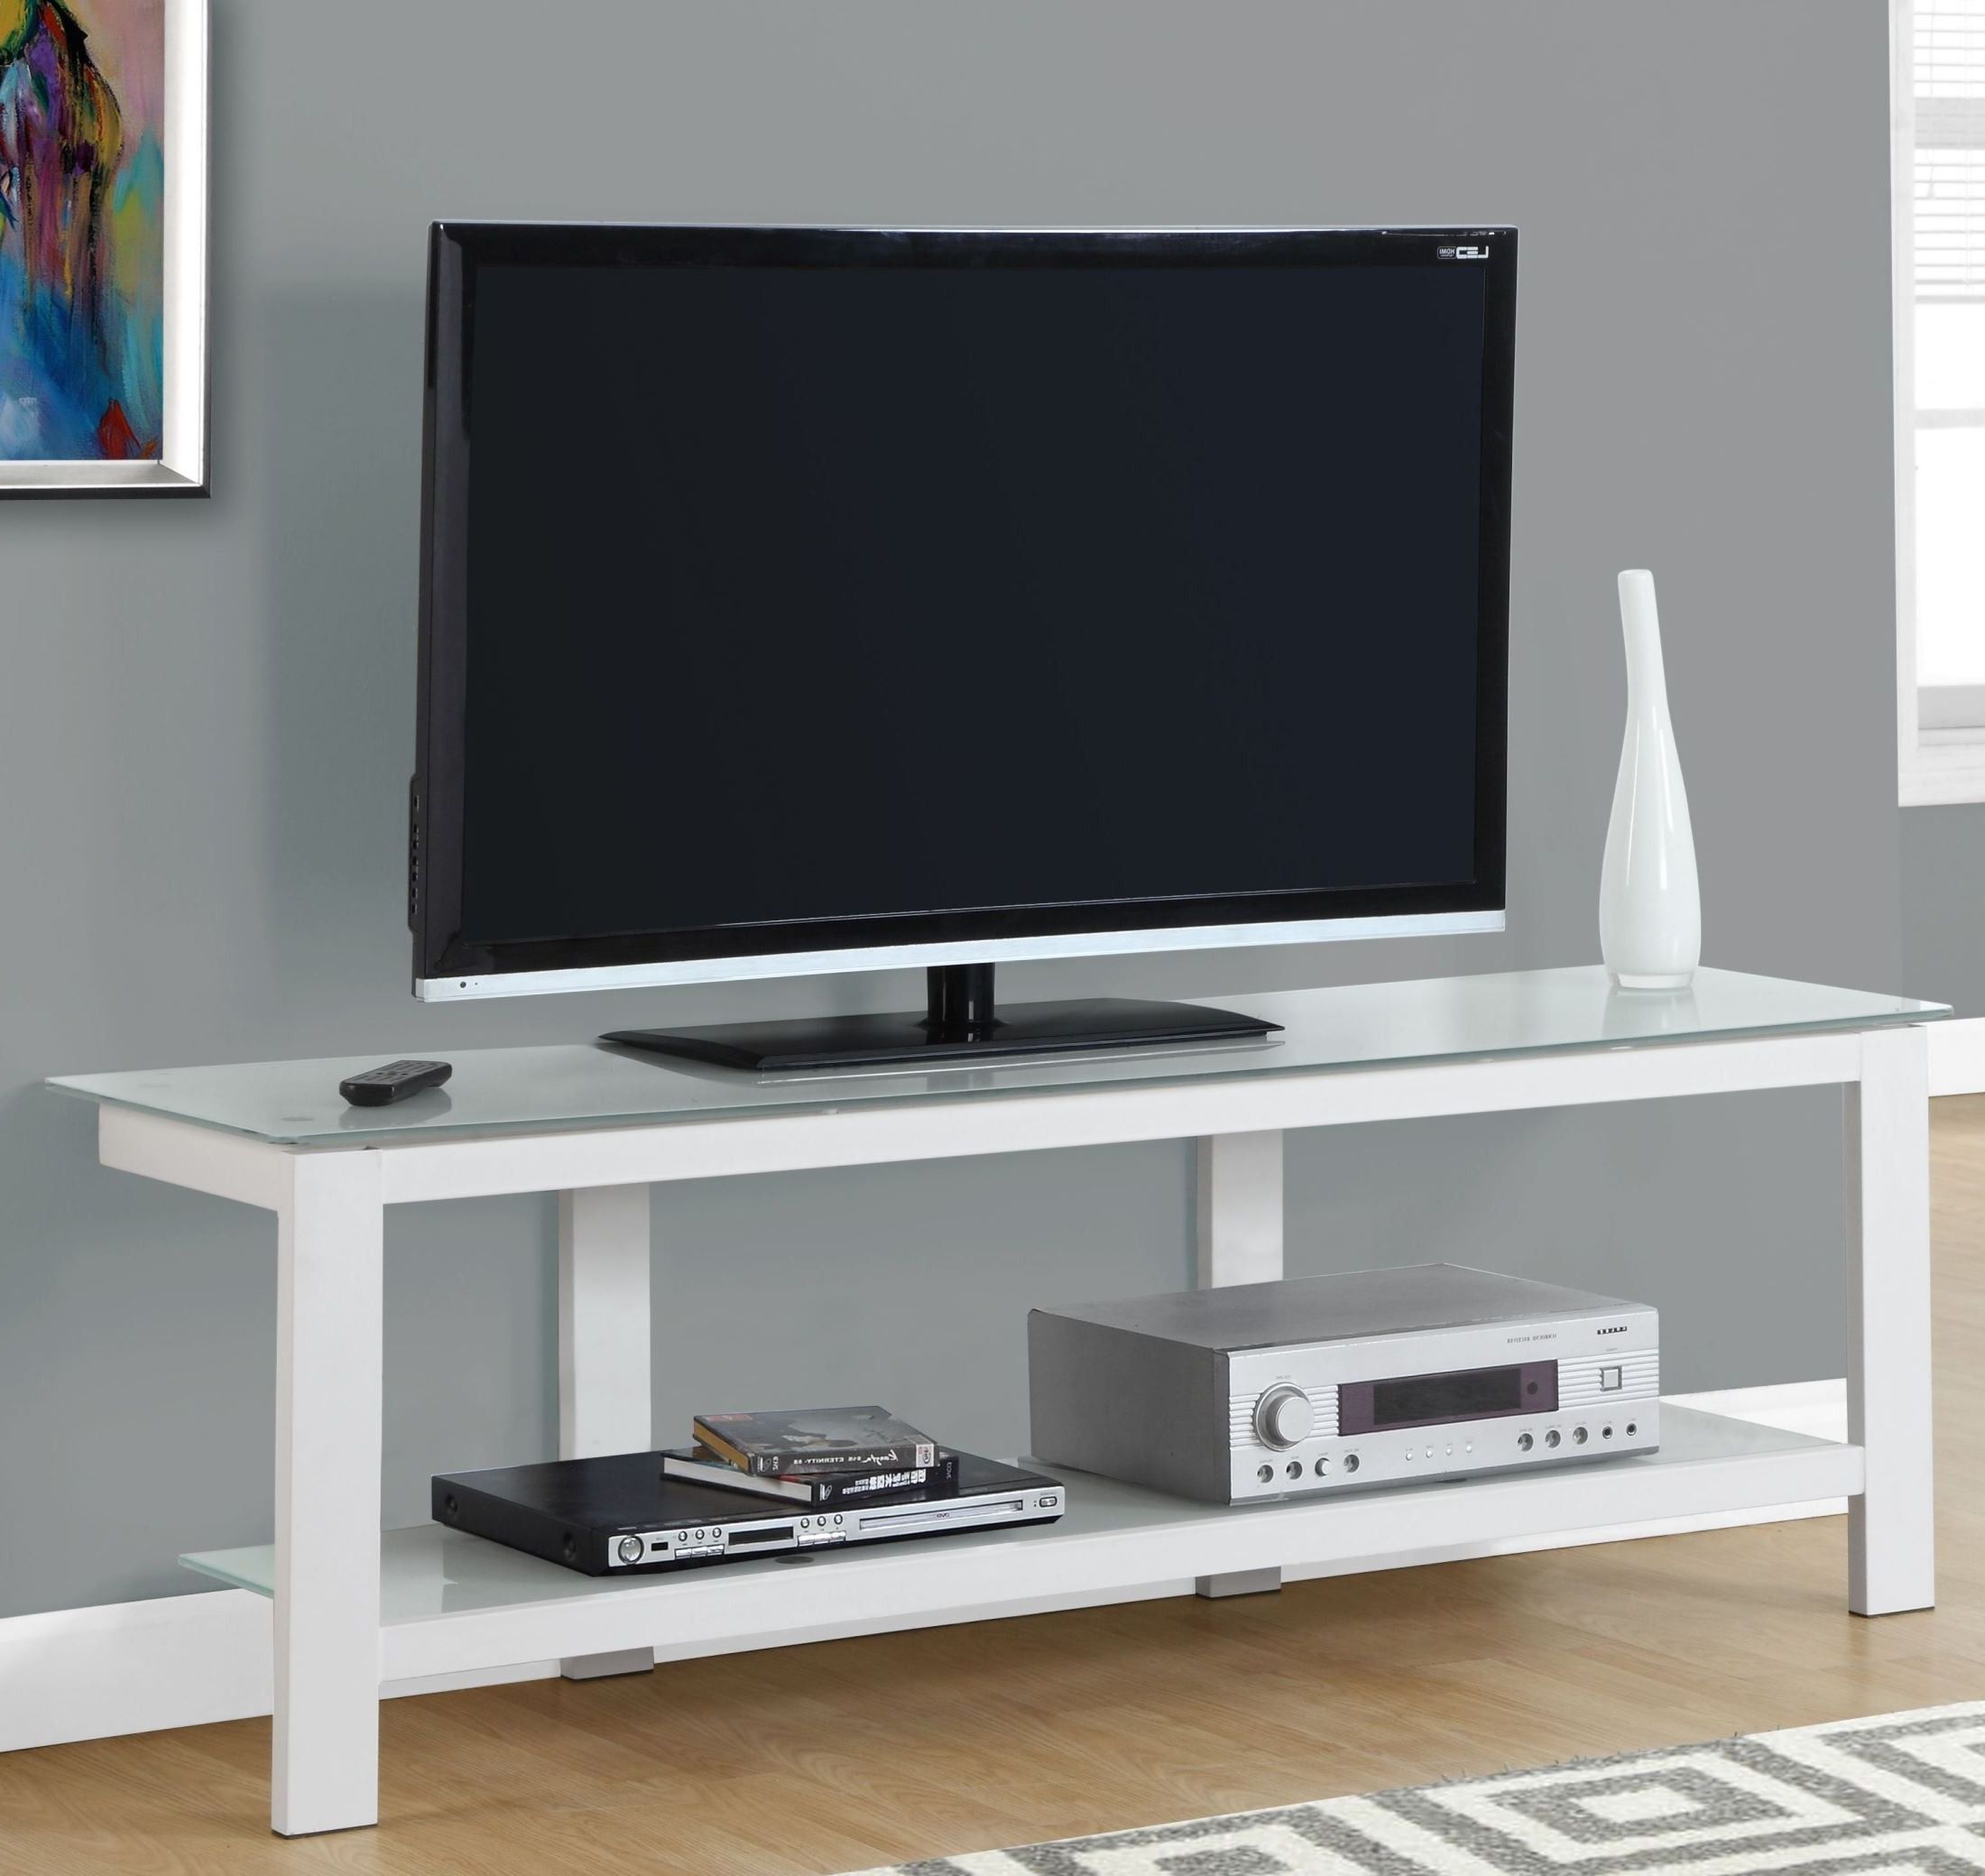 Best And Newest Glass Shelves Tv Stands In White Frosted Tempered Glass 60" Tv Stand From Monarch (Photo 8 of 10)